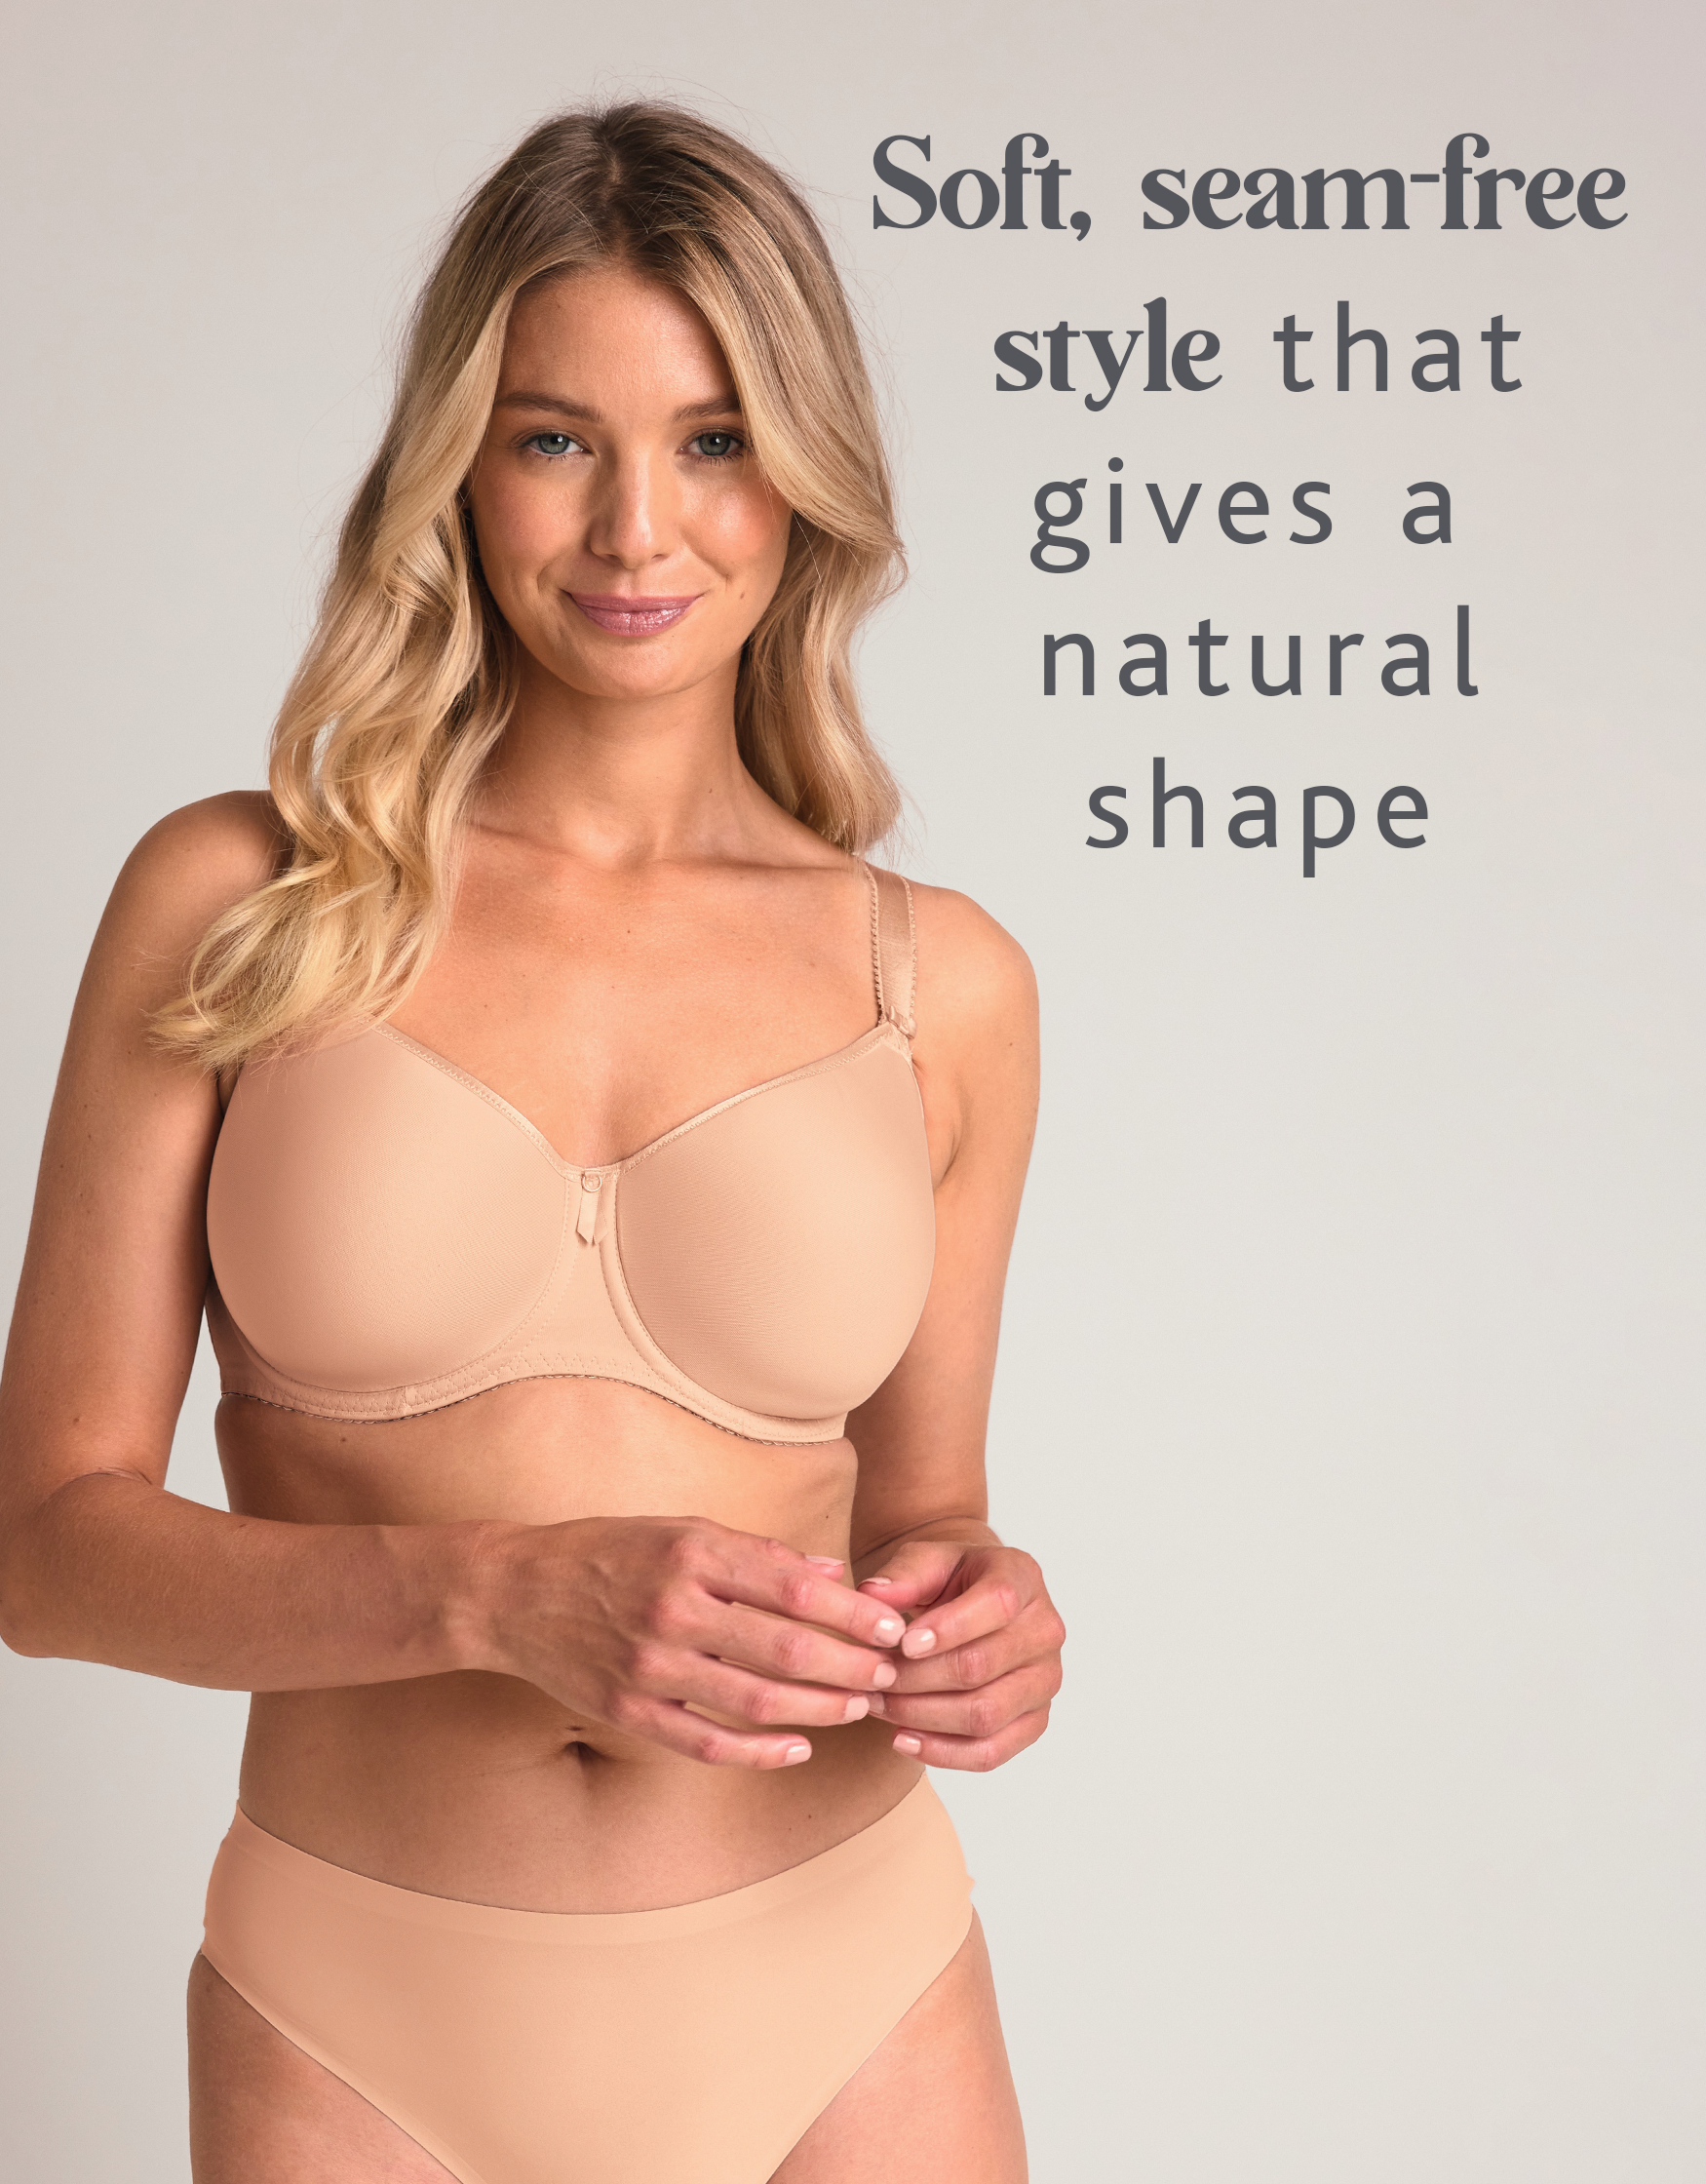 Bravissimo now offer virtual bra fittings to help customers at